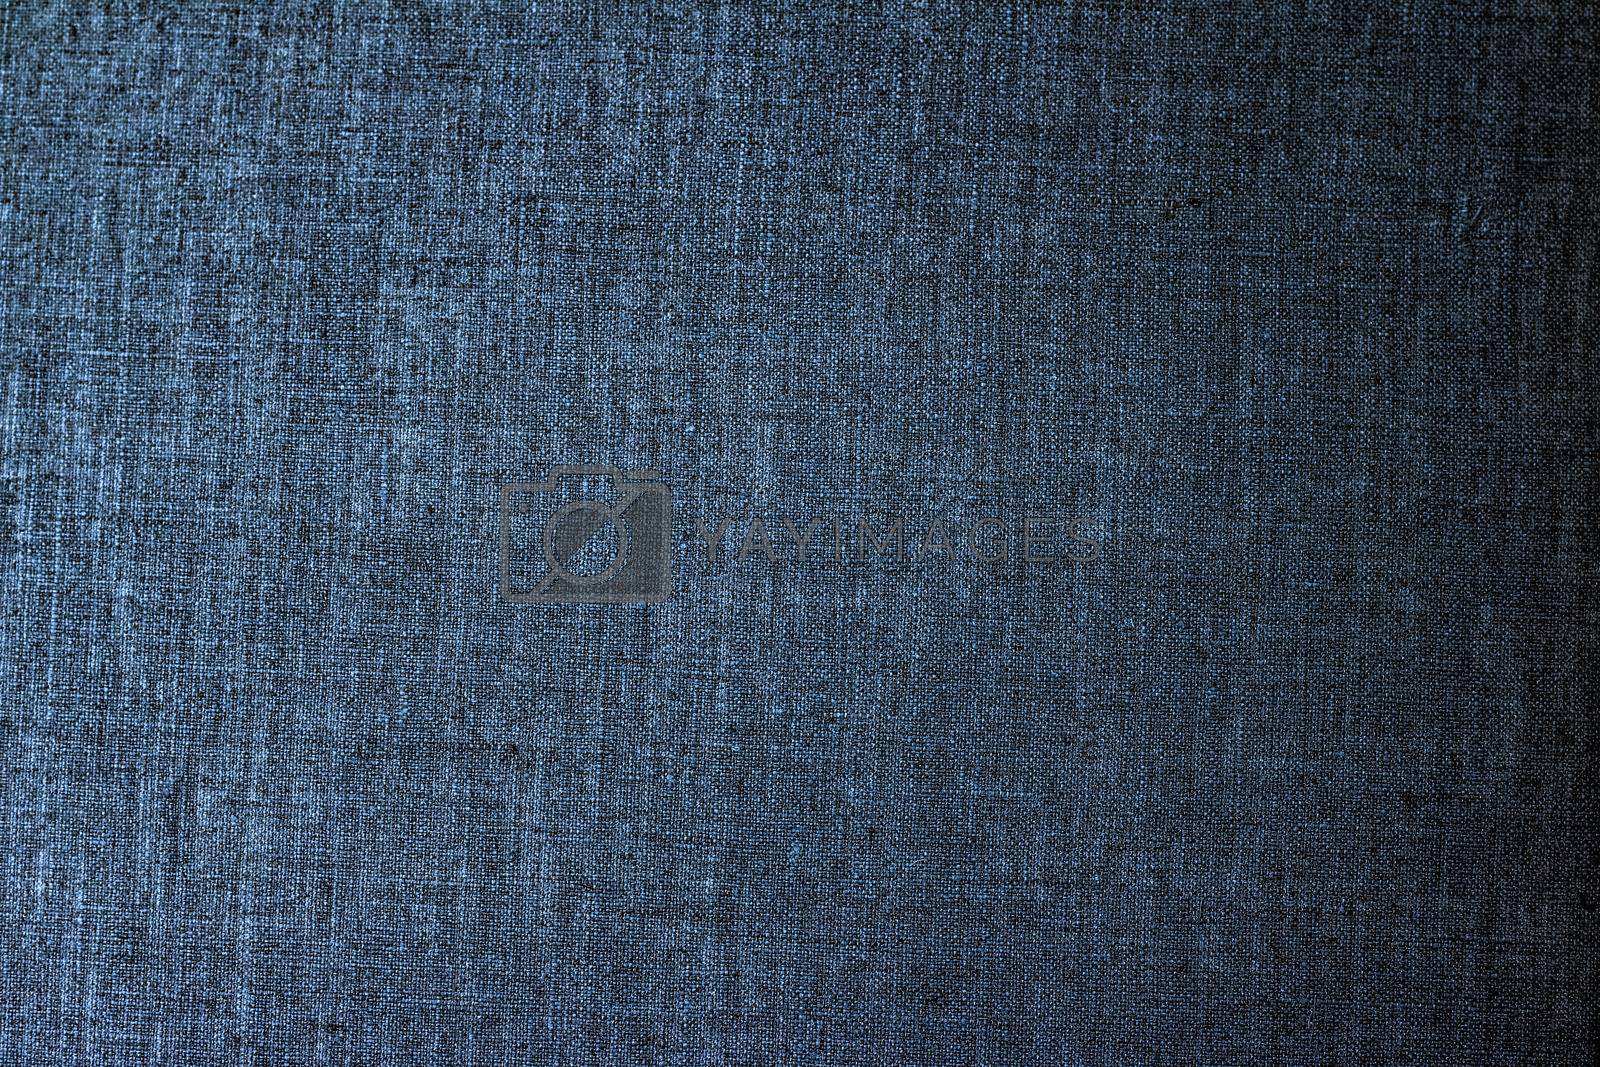 Royalty free image of Decorative linen blue jeans fabric textured background for interior, furniture design and fashion label backdrop by Anneleven